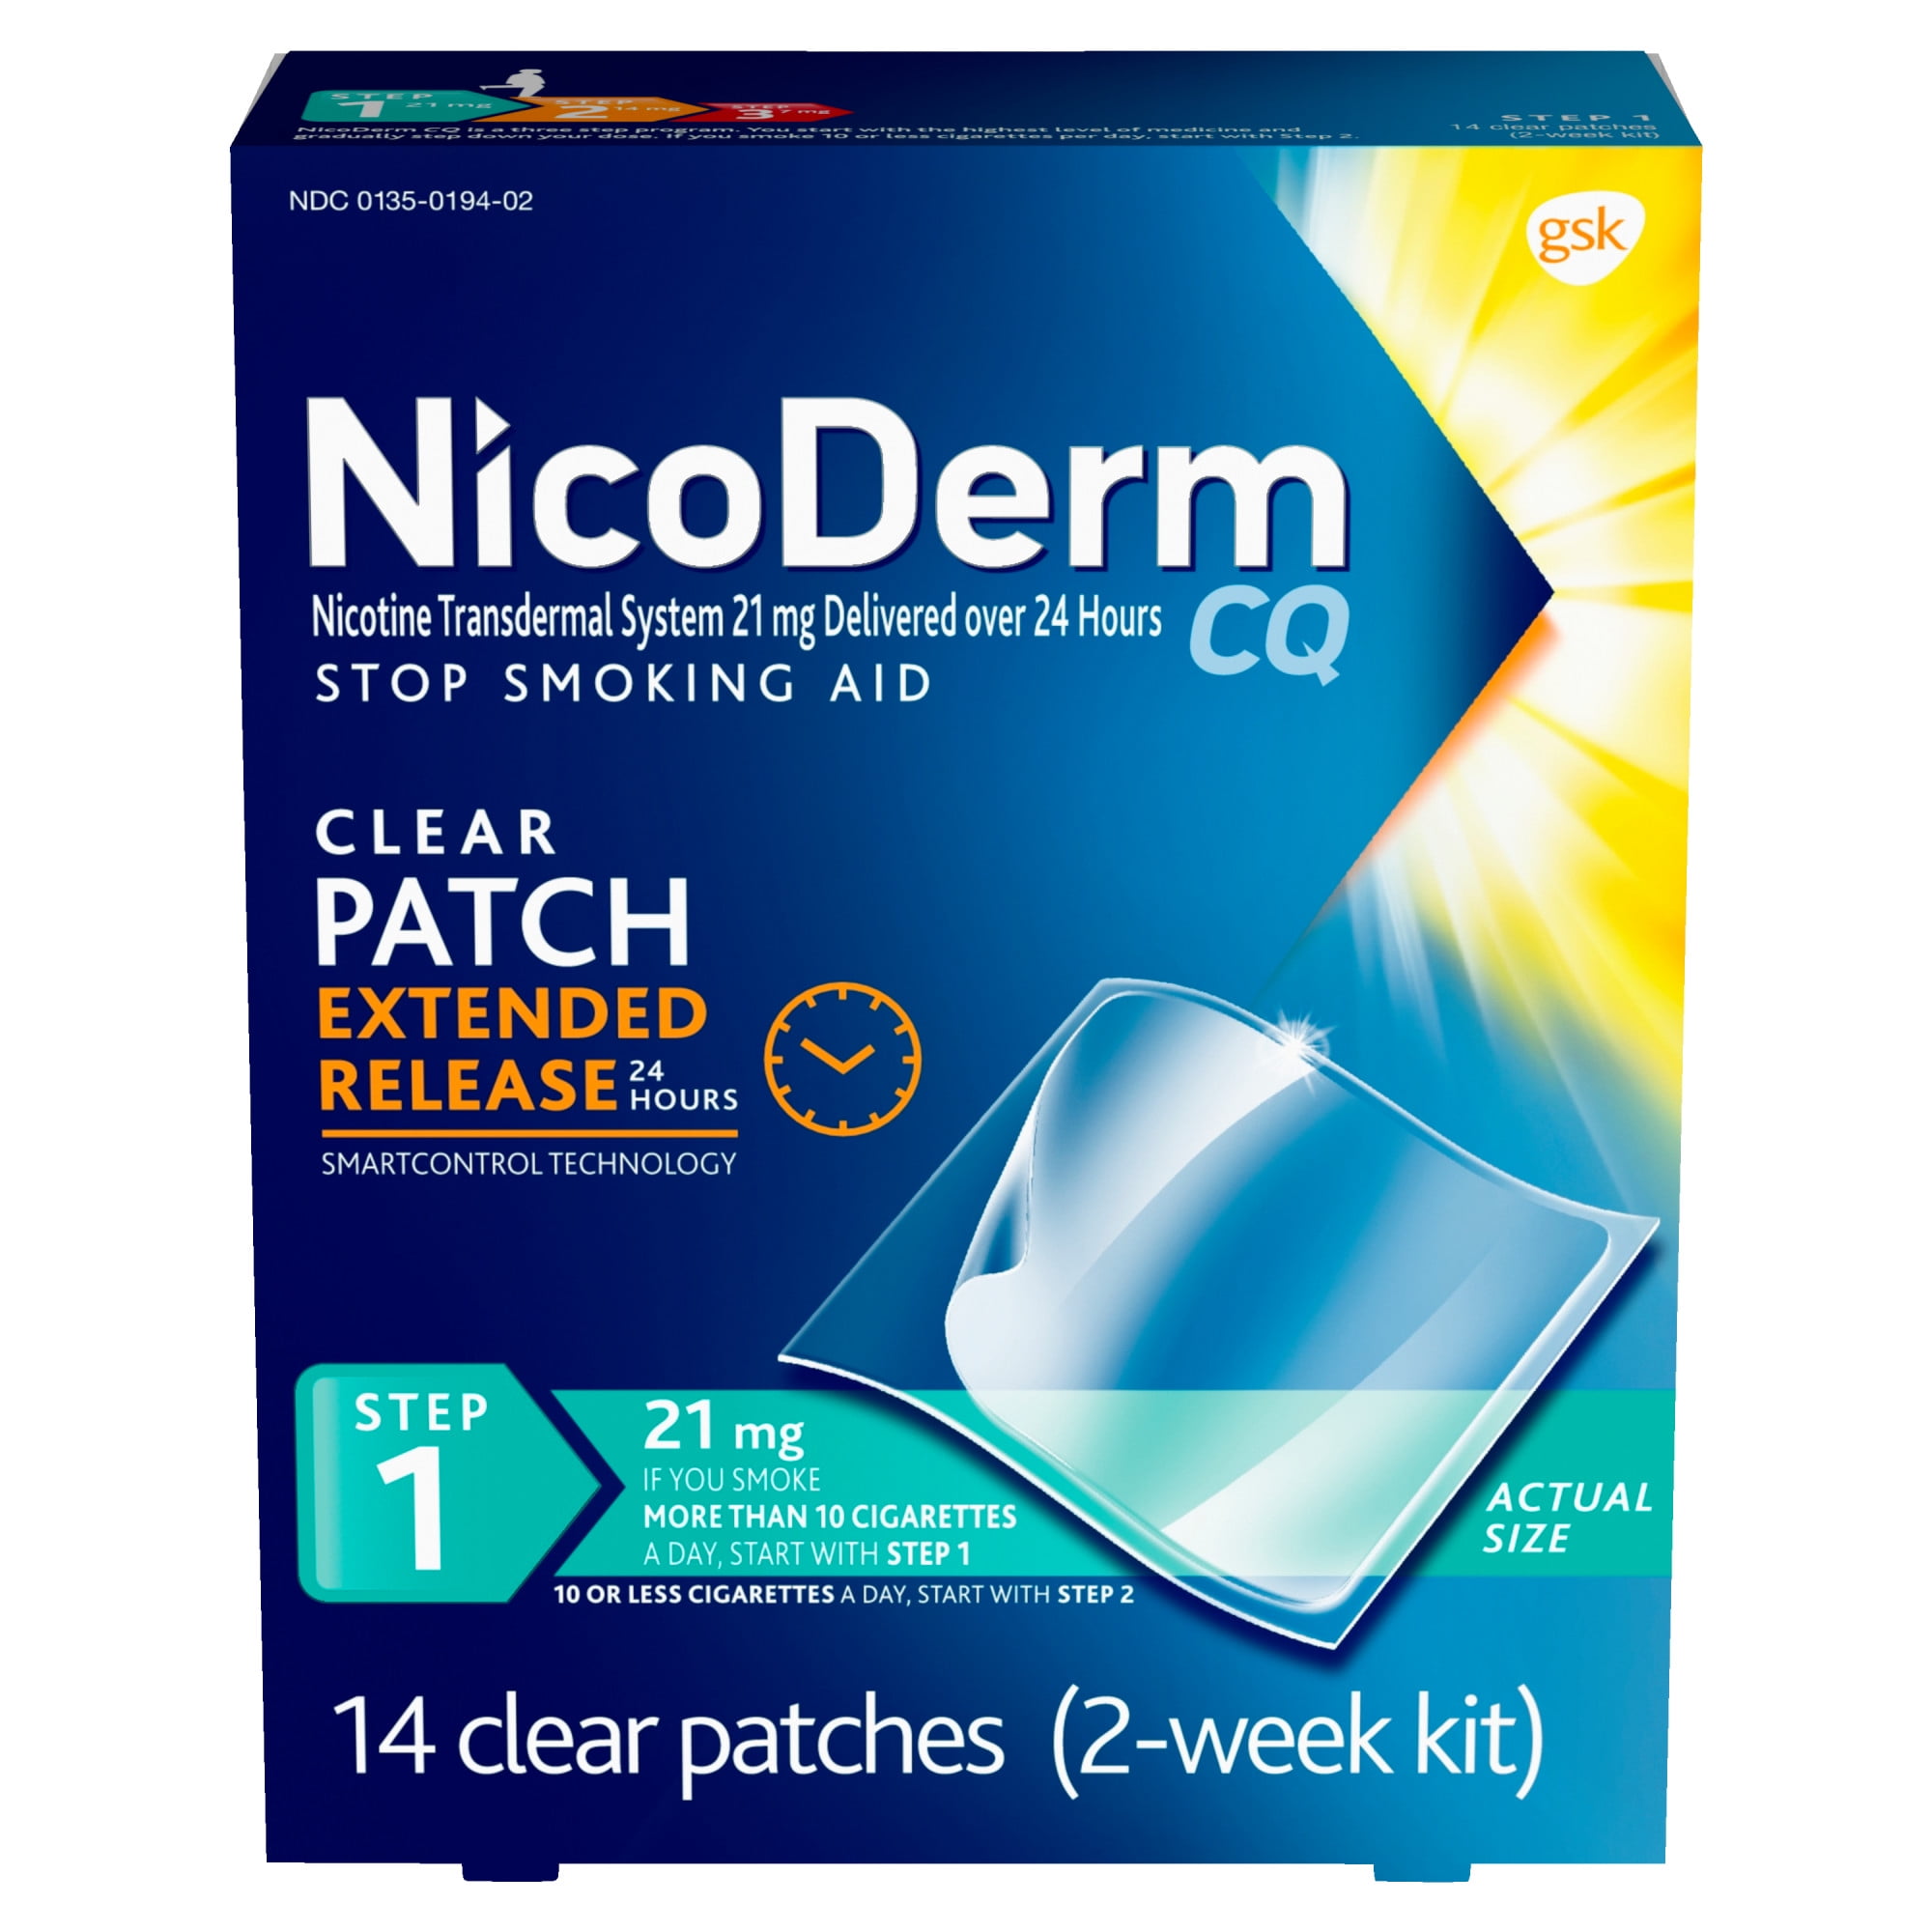 NicoDerm CQ Step 1 Extended Release Nicotine Patches to Quit Smoking, 21 Mg, 14 Count